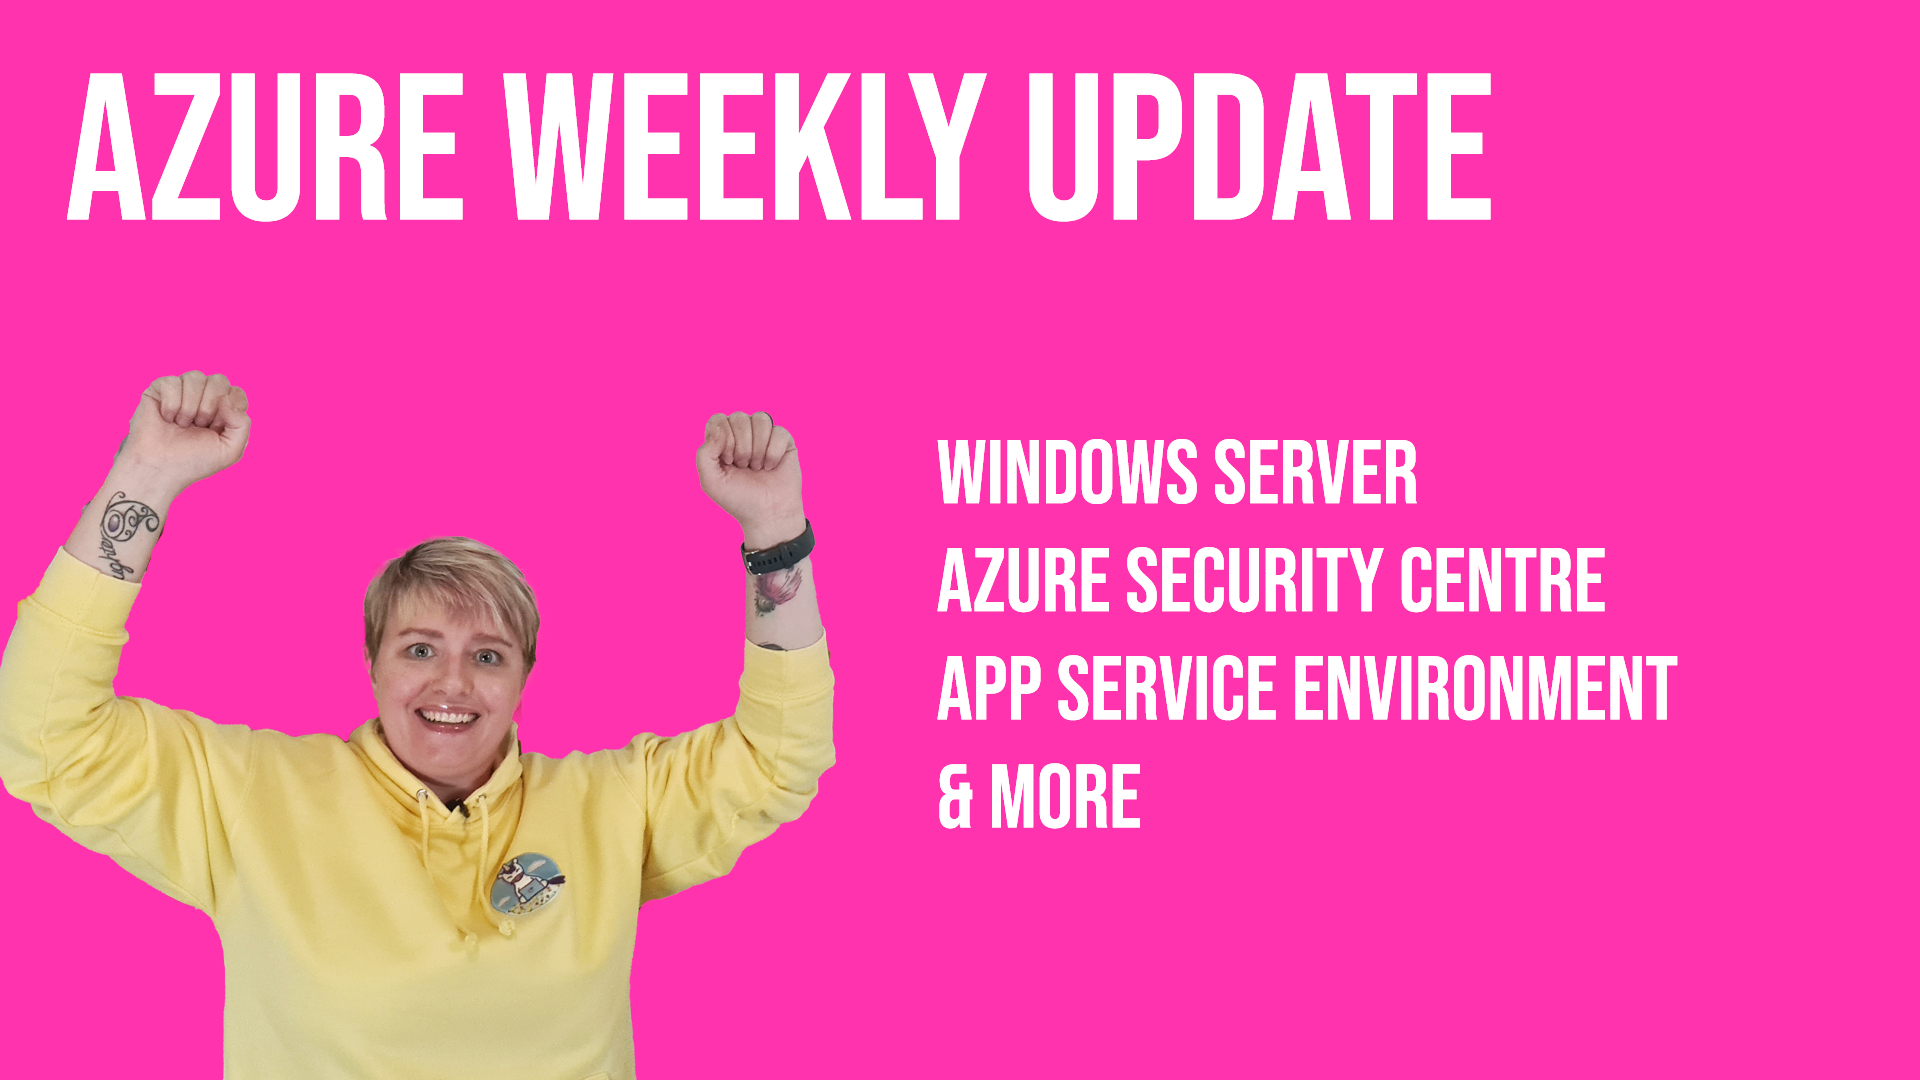 Weekly Update #99 - Windows Server, Azure Security Centre, App Service Environment & much more